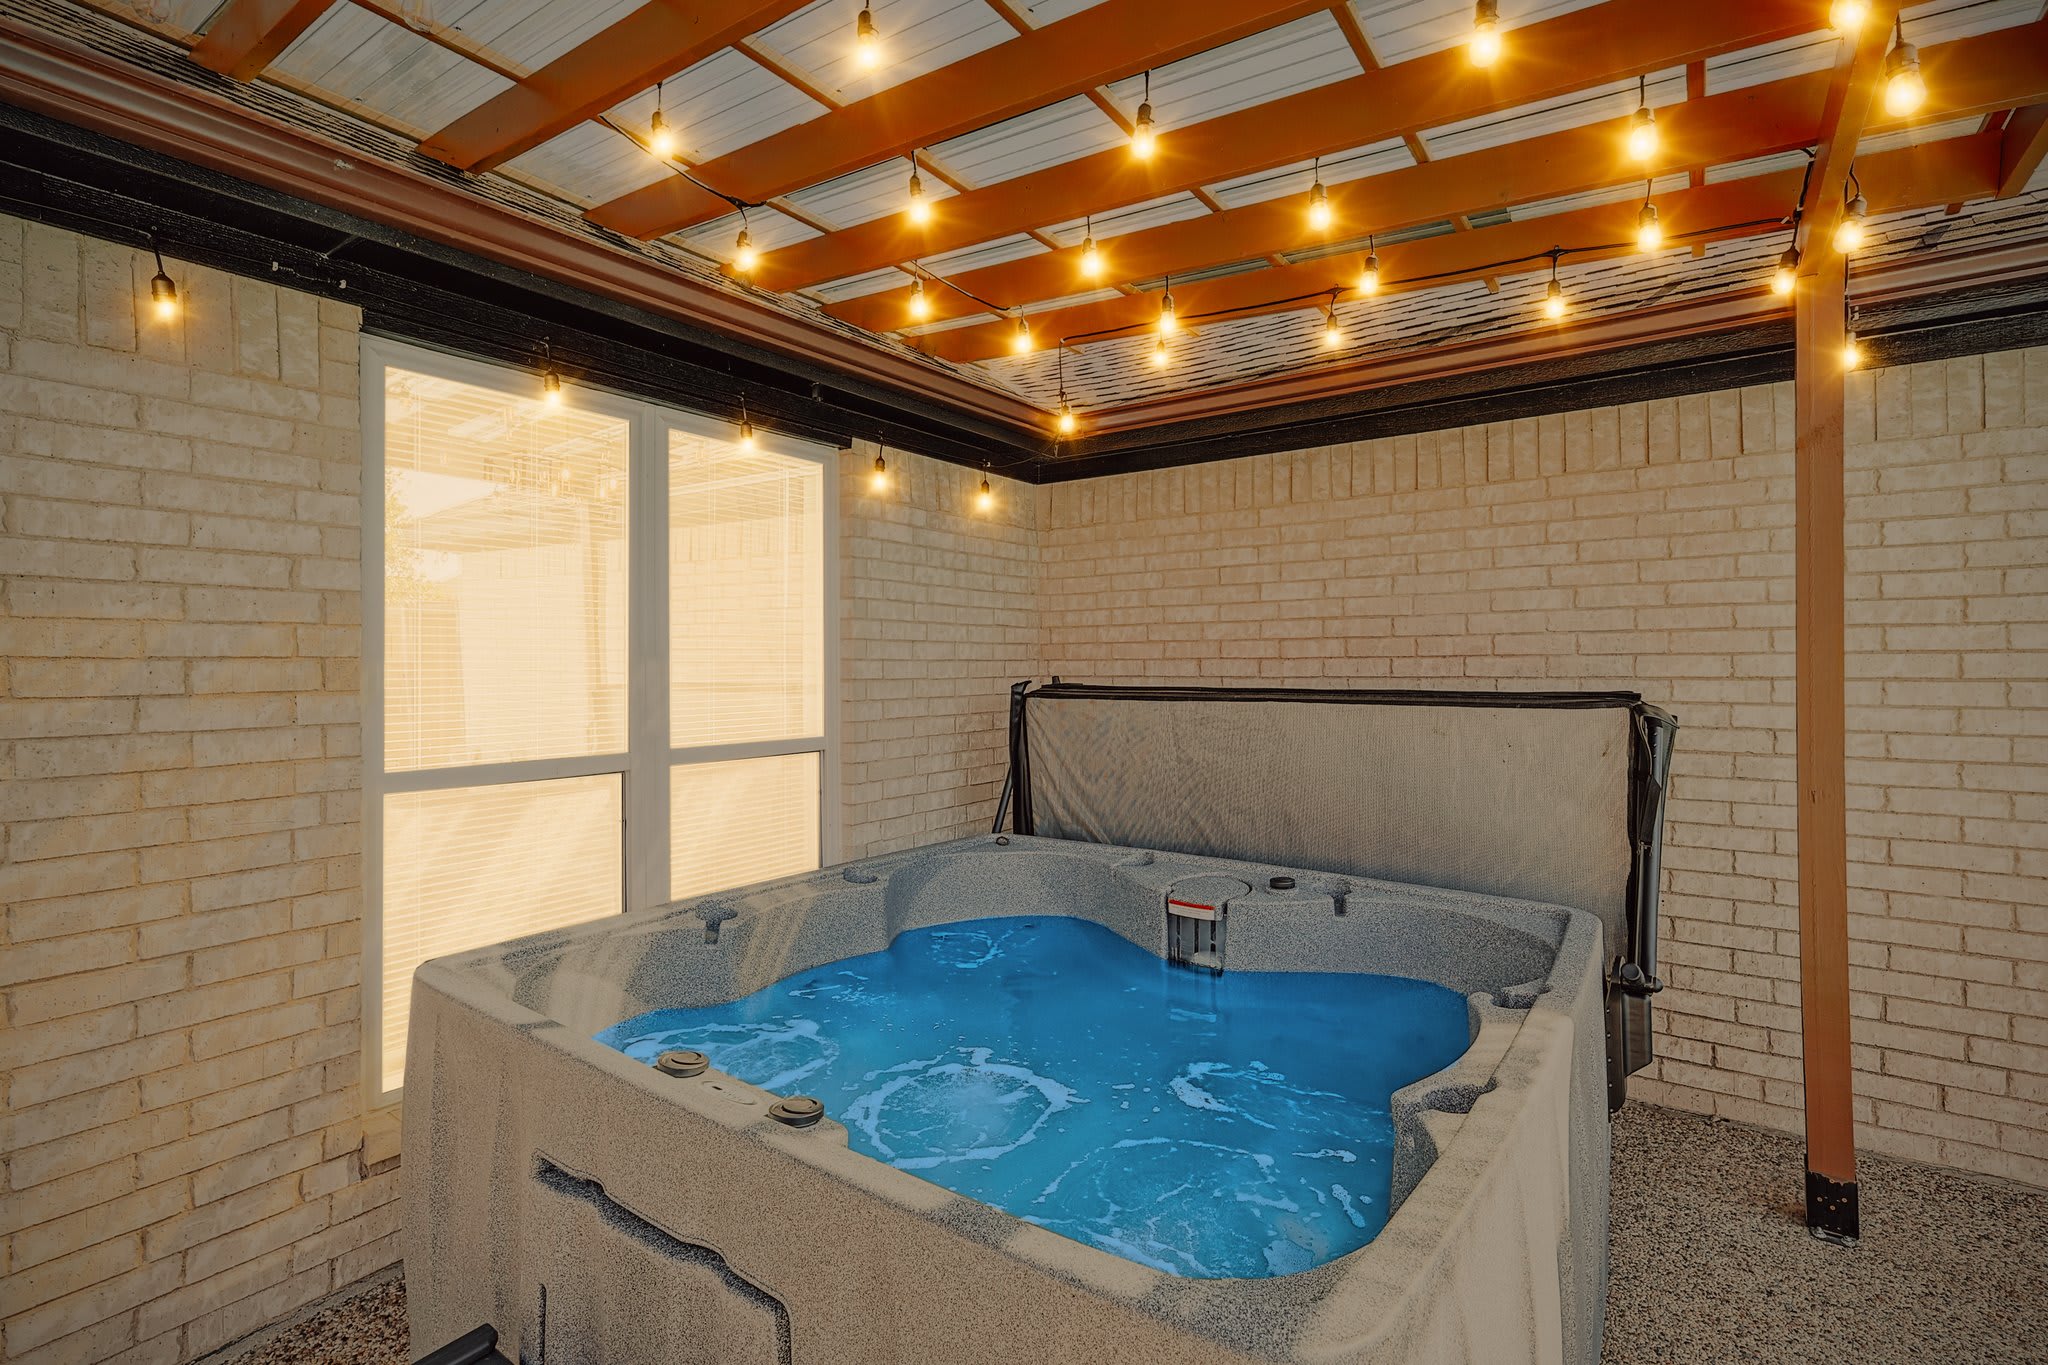 You’ll instantly feel the tension slip off your shoulders as you slip into this jacuzzi and relax under the warm glow of the string lights.